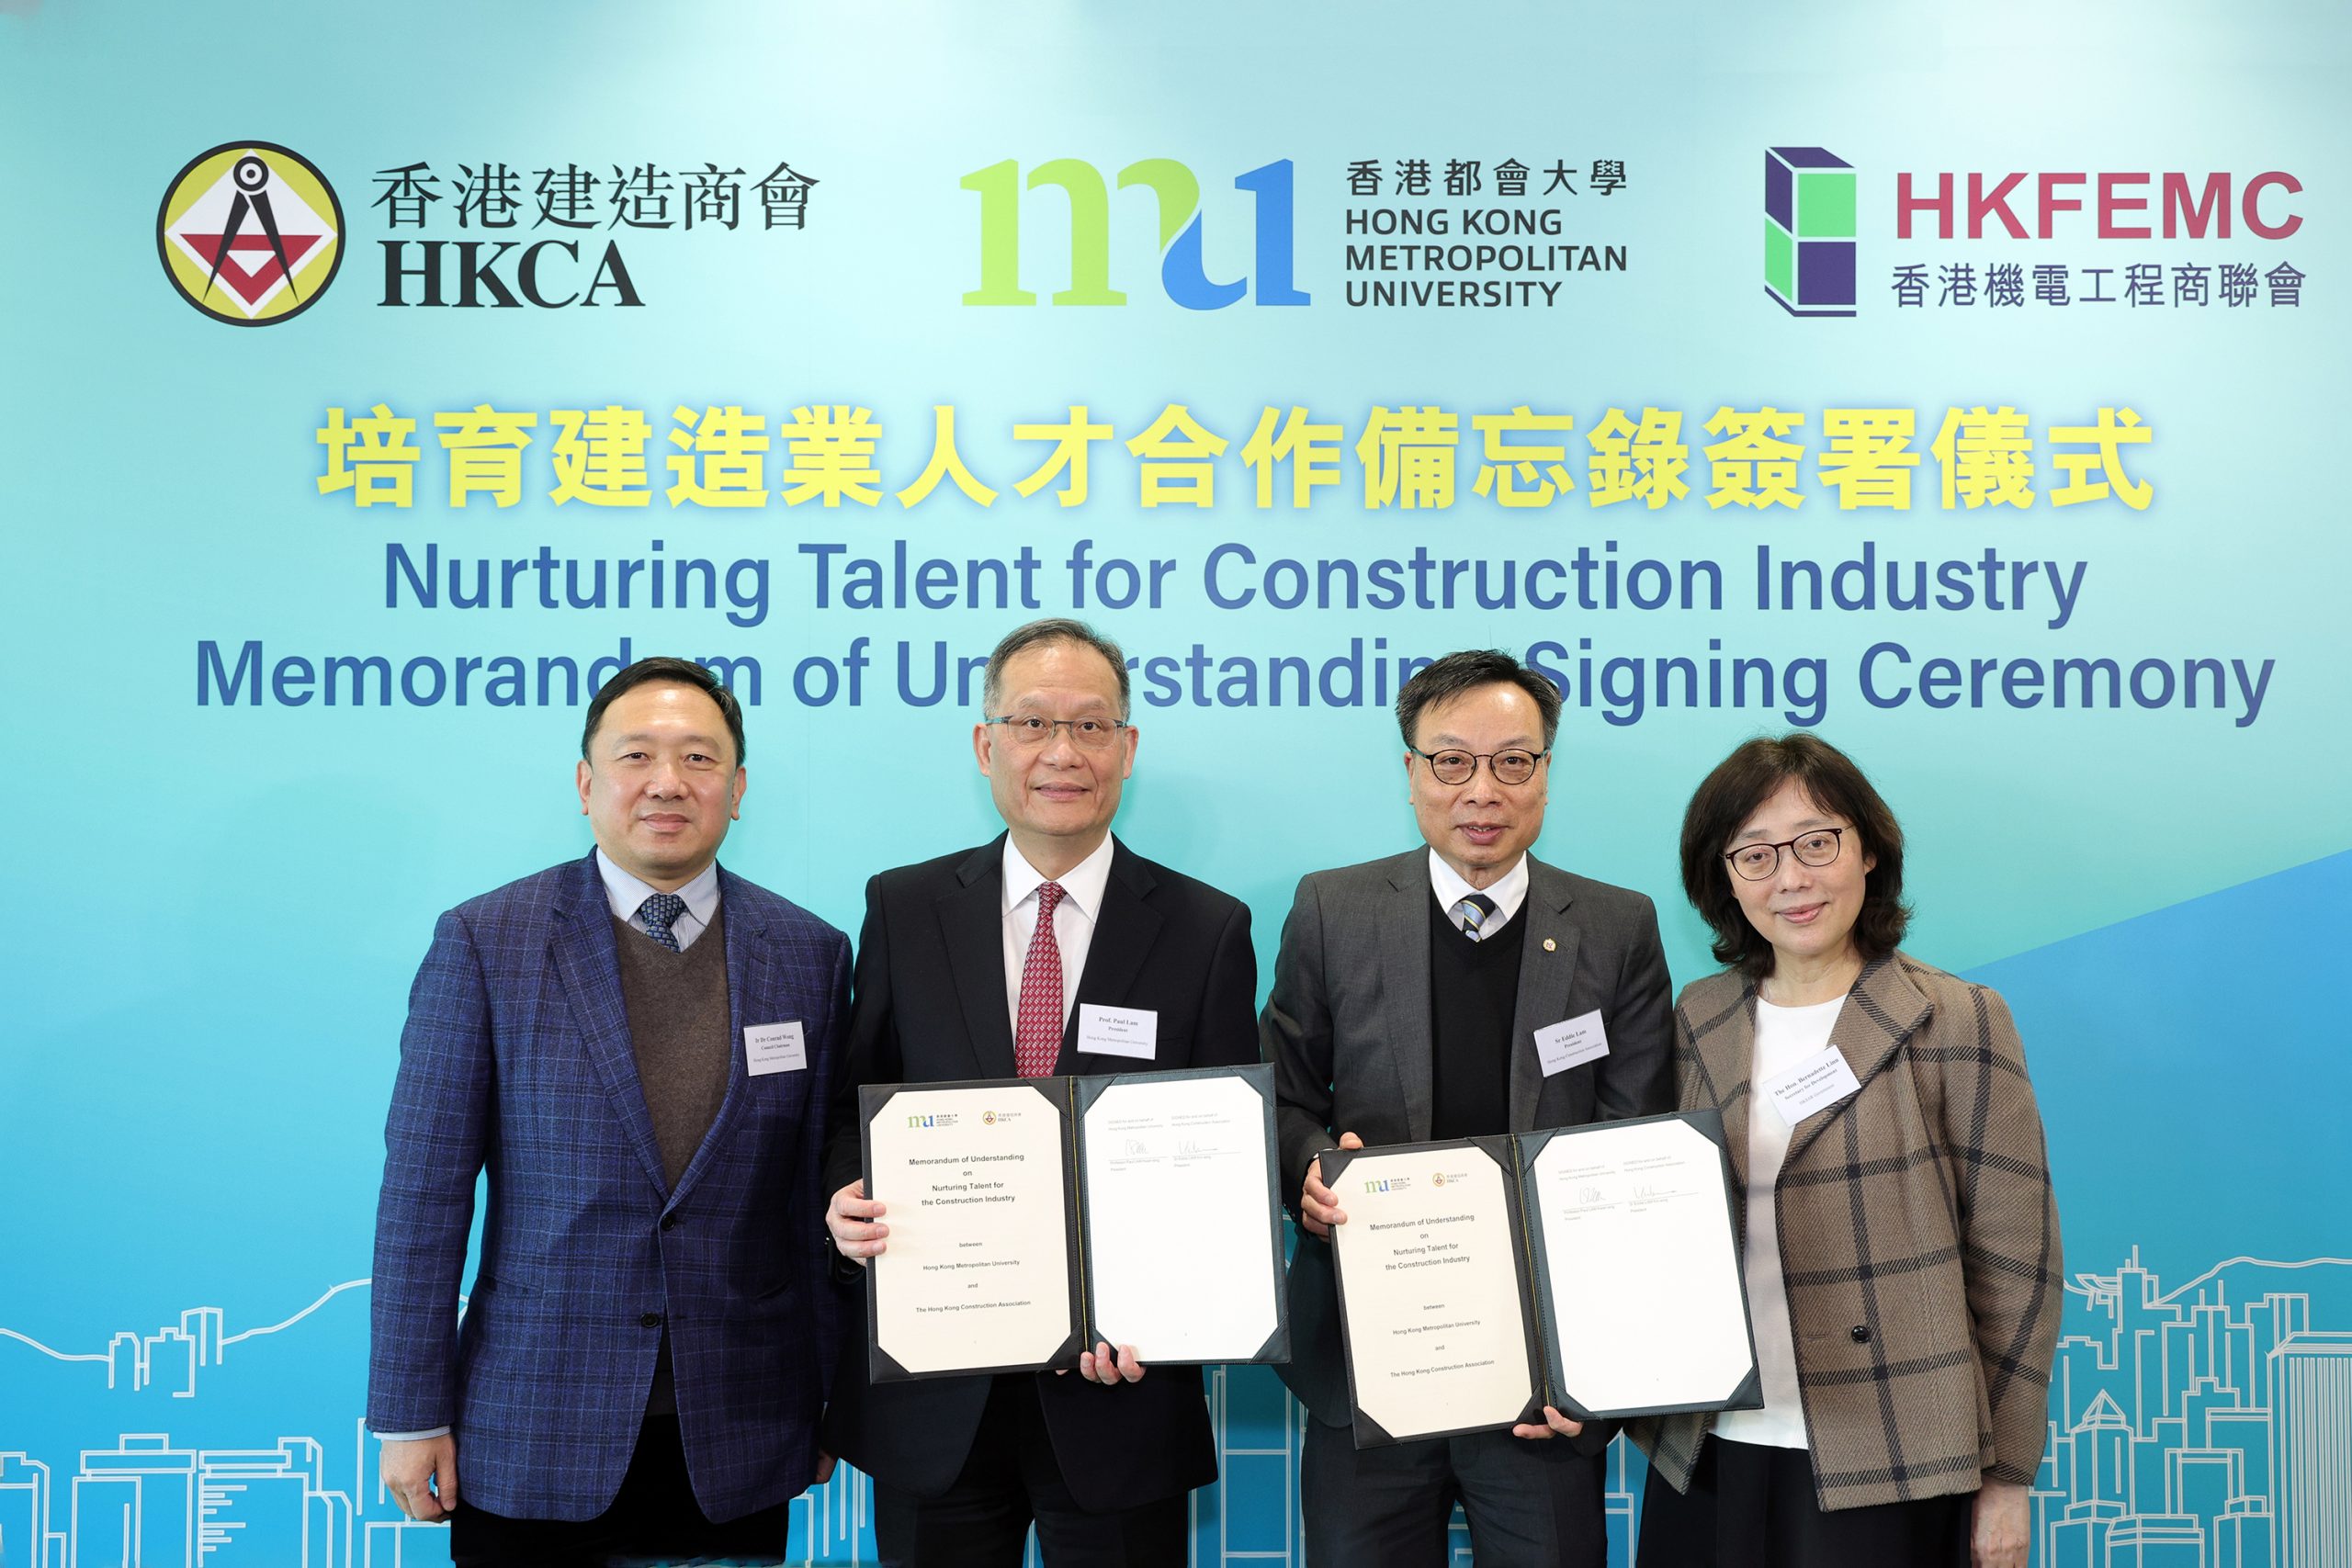 The MOU is signed by HKMU President Prof. Paul Lam Kwan-sing (second from left) and HKCA President Sr Eddie Lam Kin-wing (second from right).